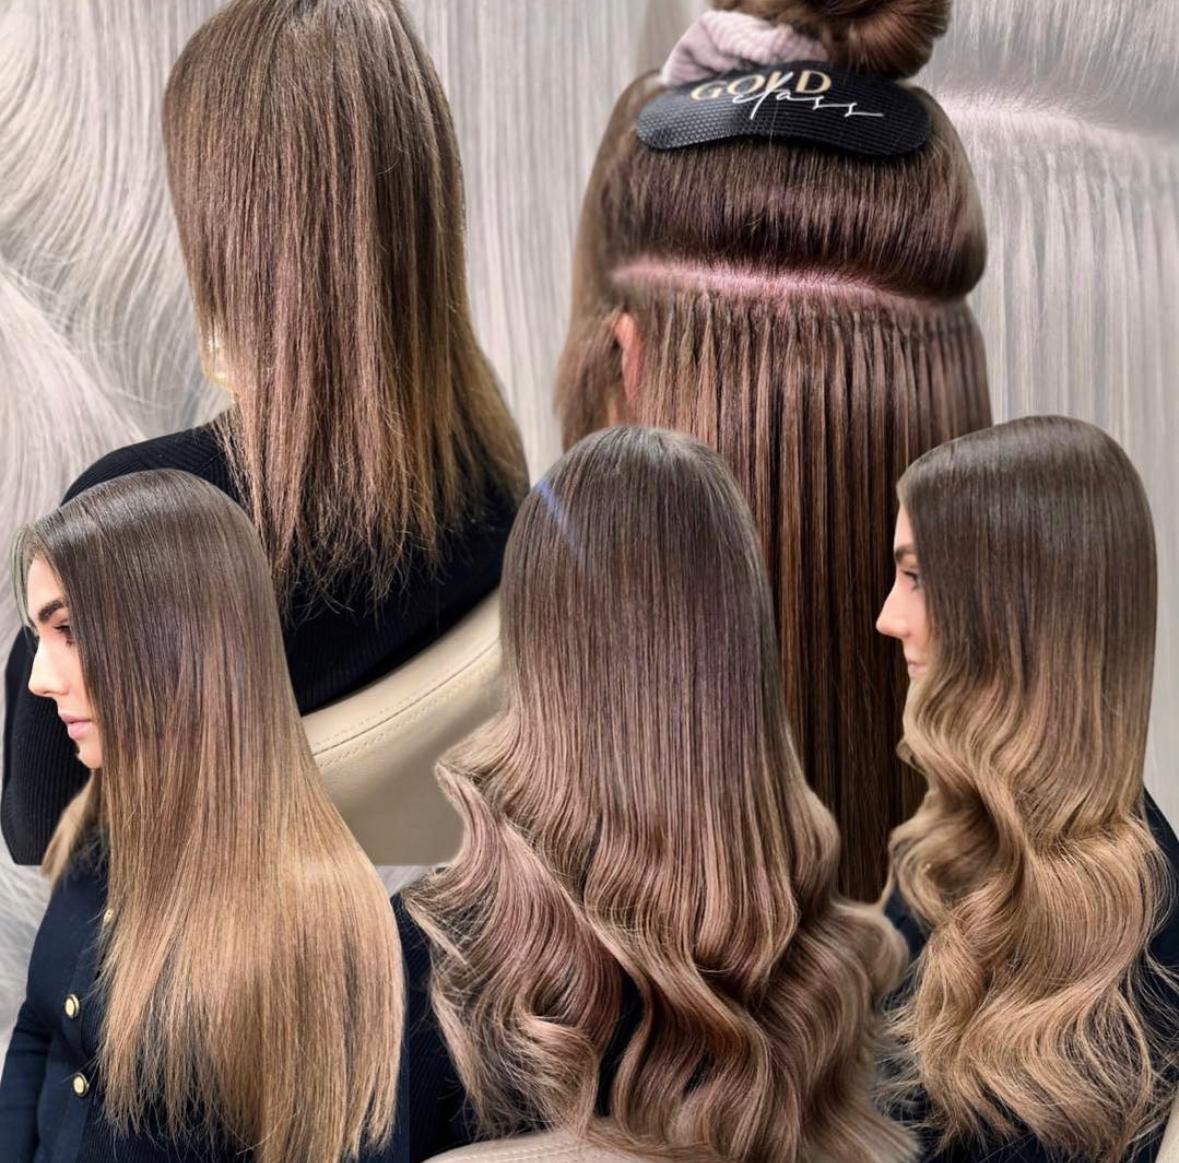 Keratin Hair Extensions: What You Need To Know